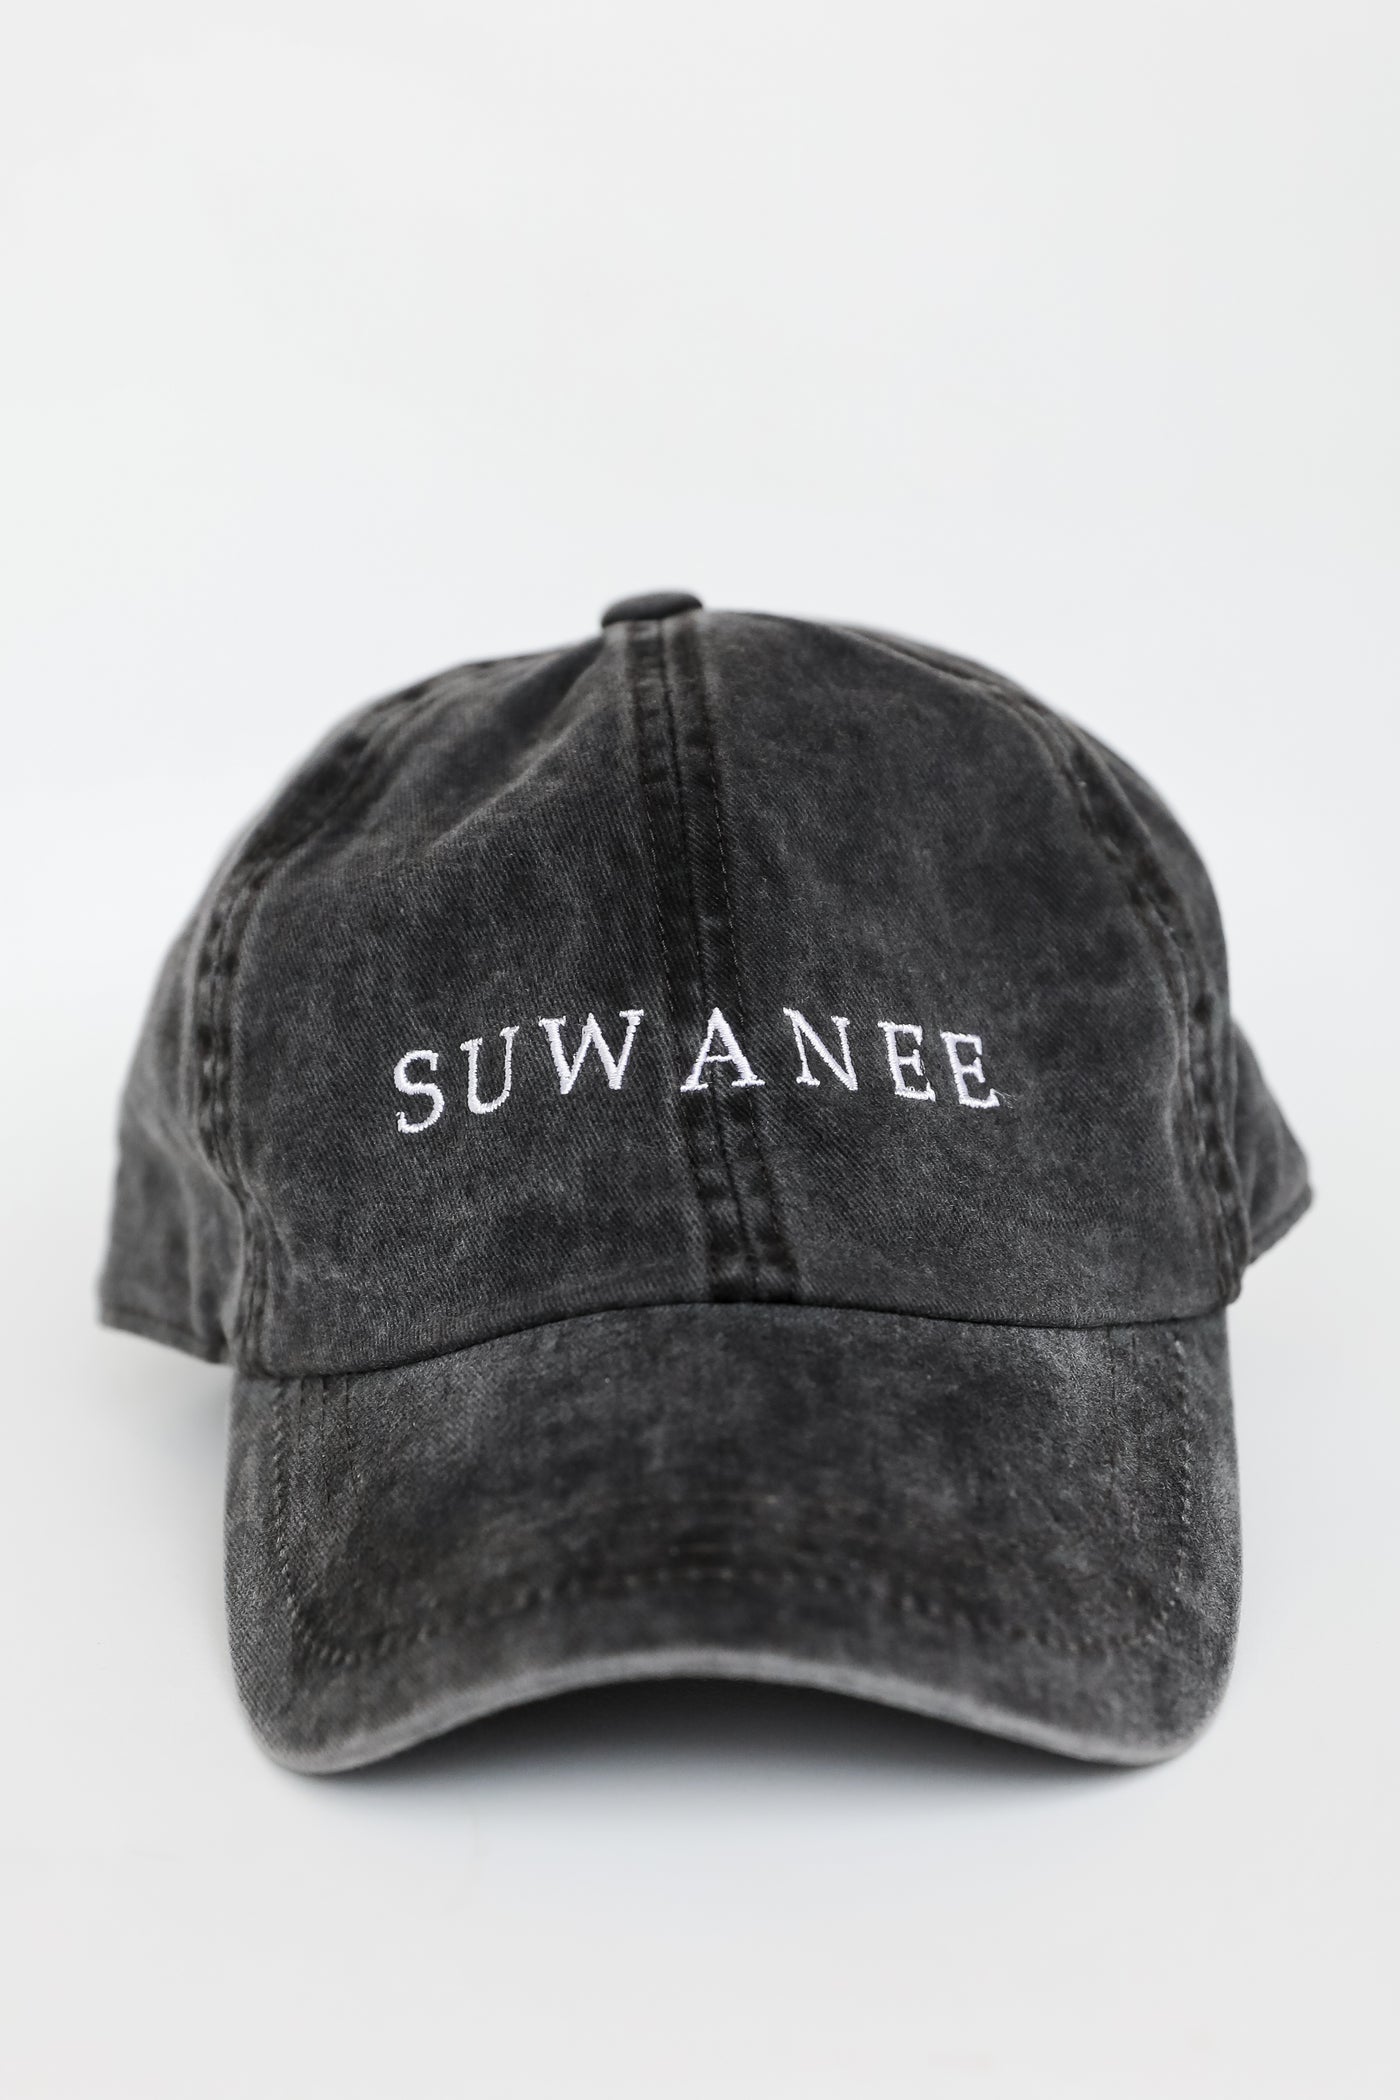 Suwanee Embroidered Hat flat lay